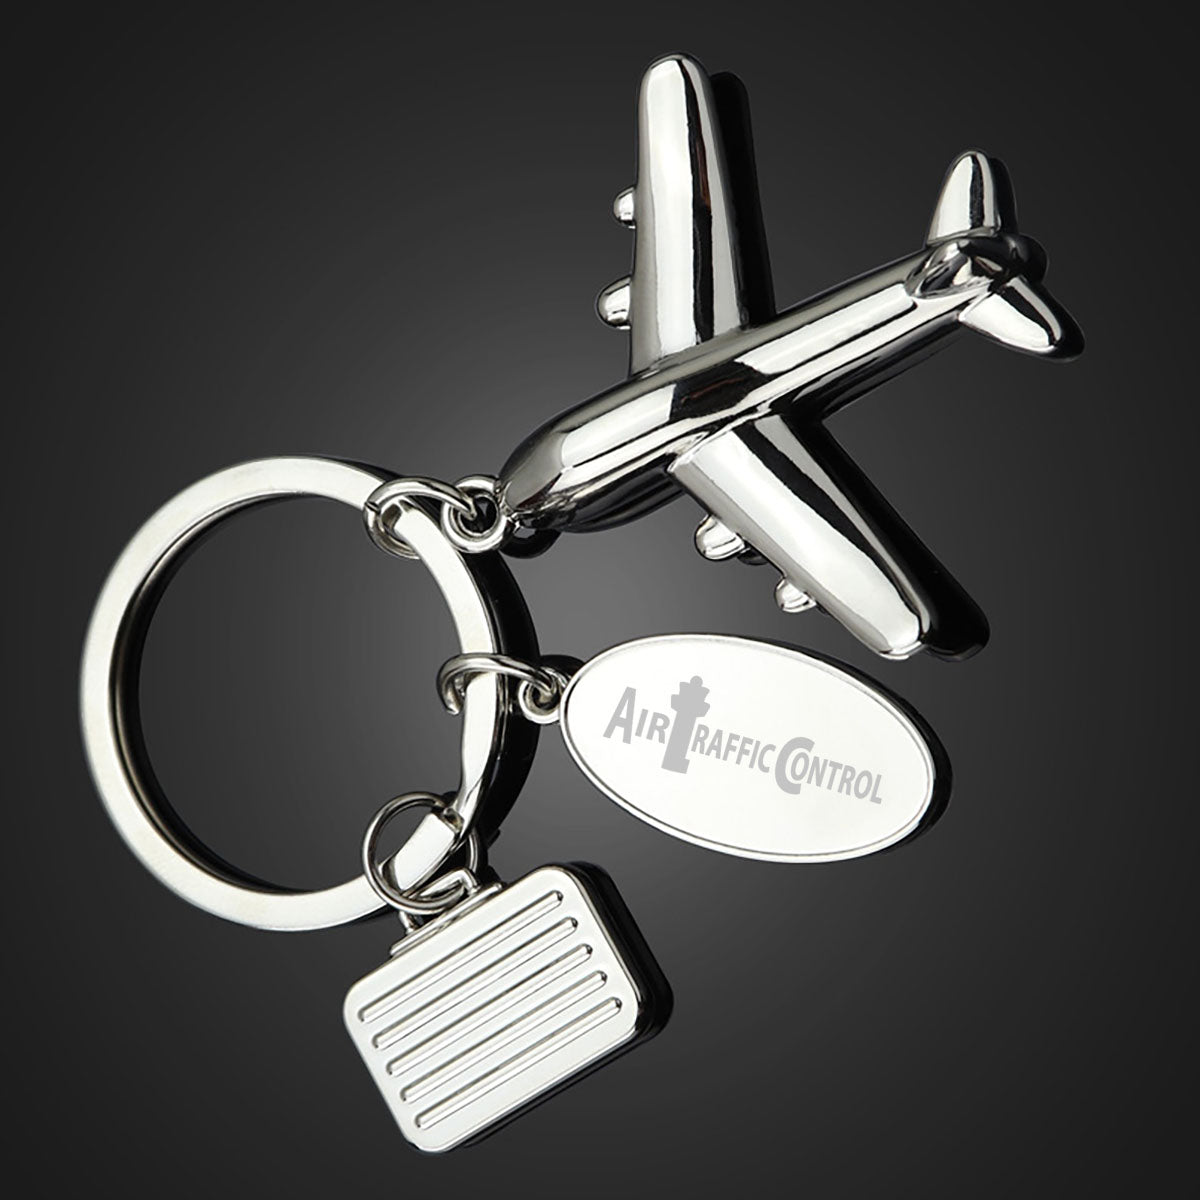 Air Traffic Control Designed Suitcase Airplane Key Chains